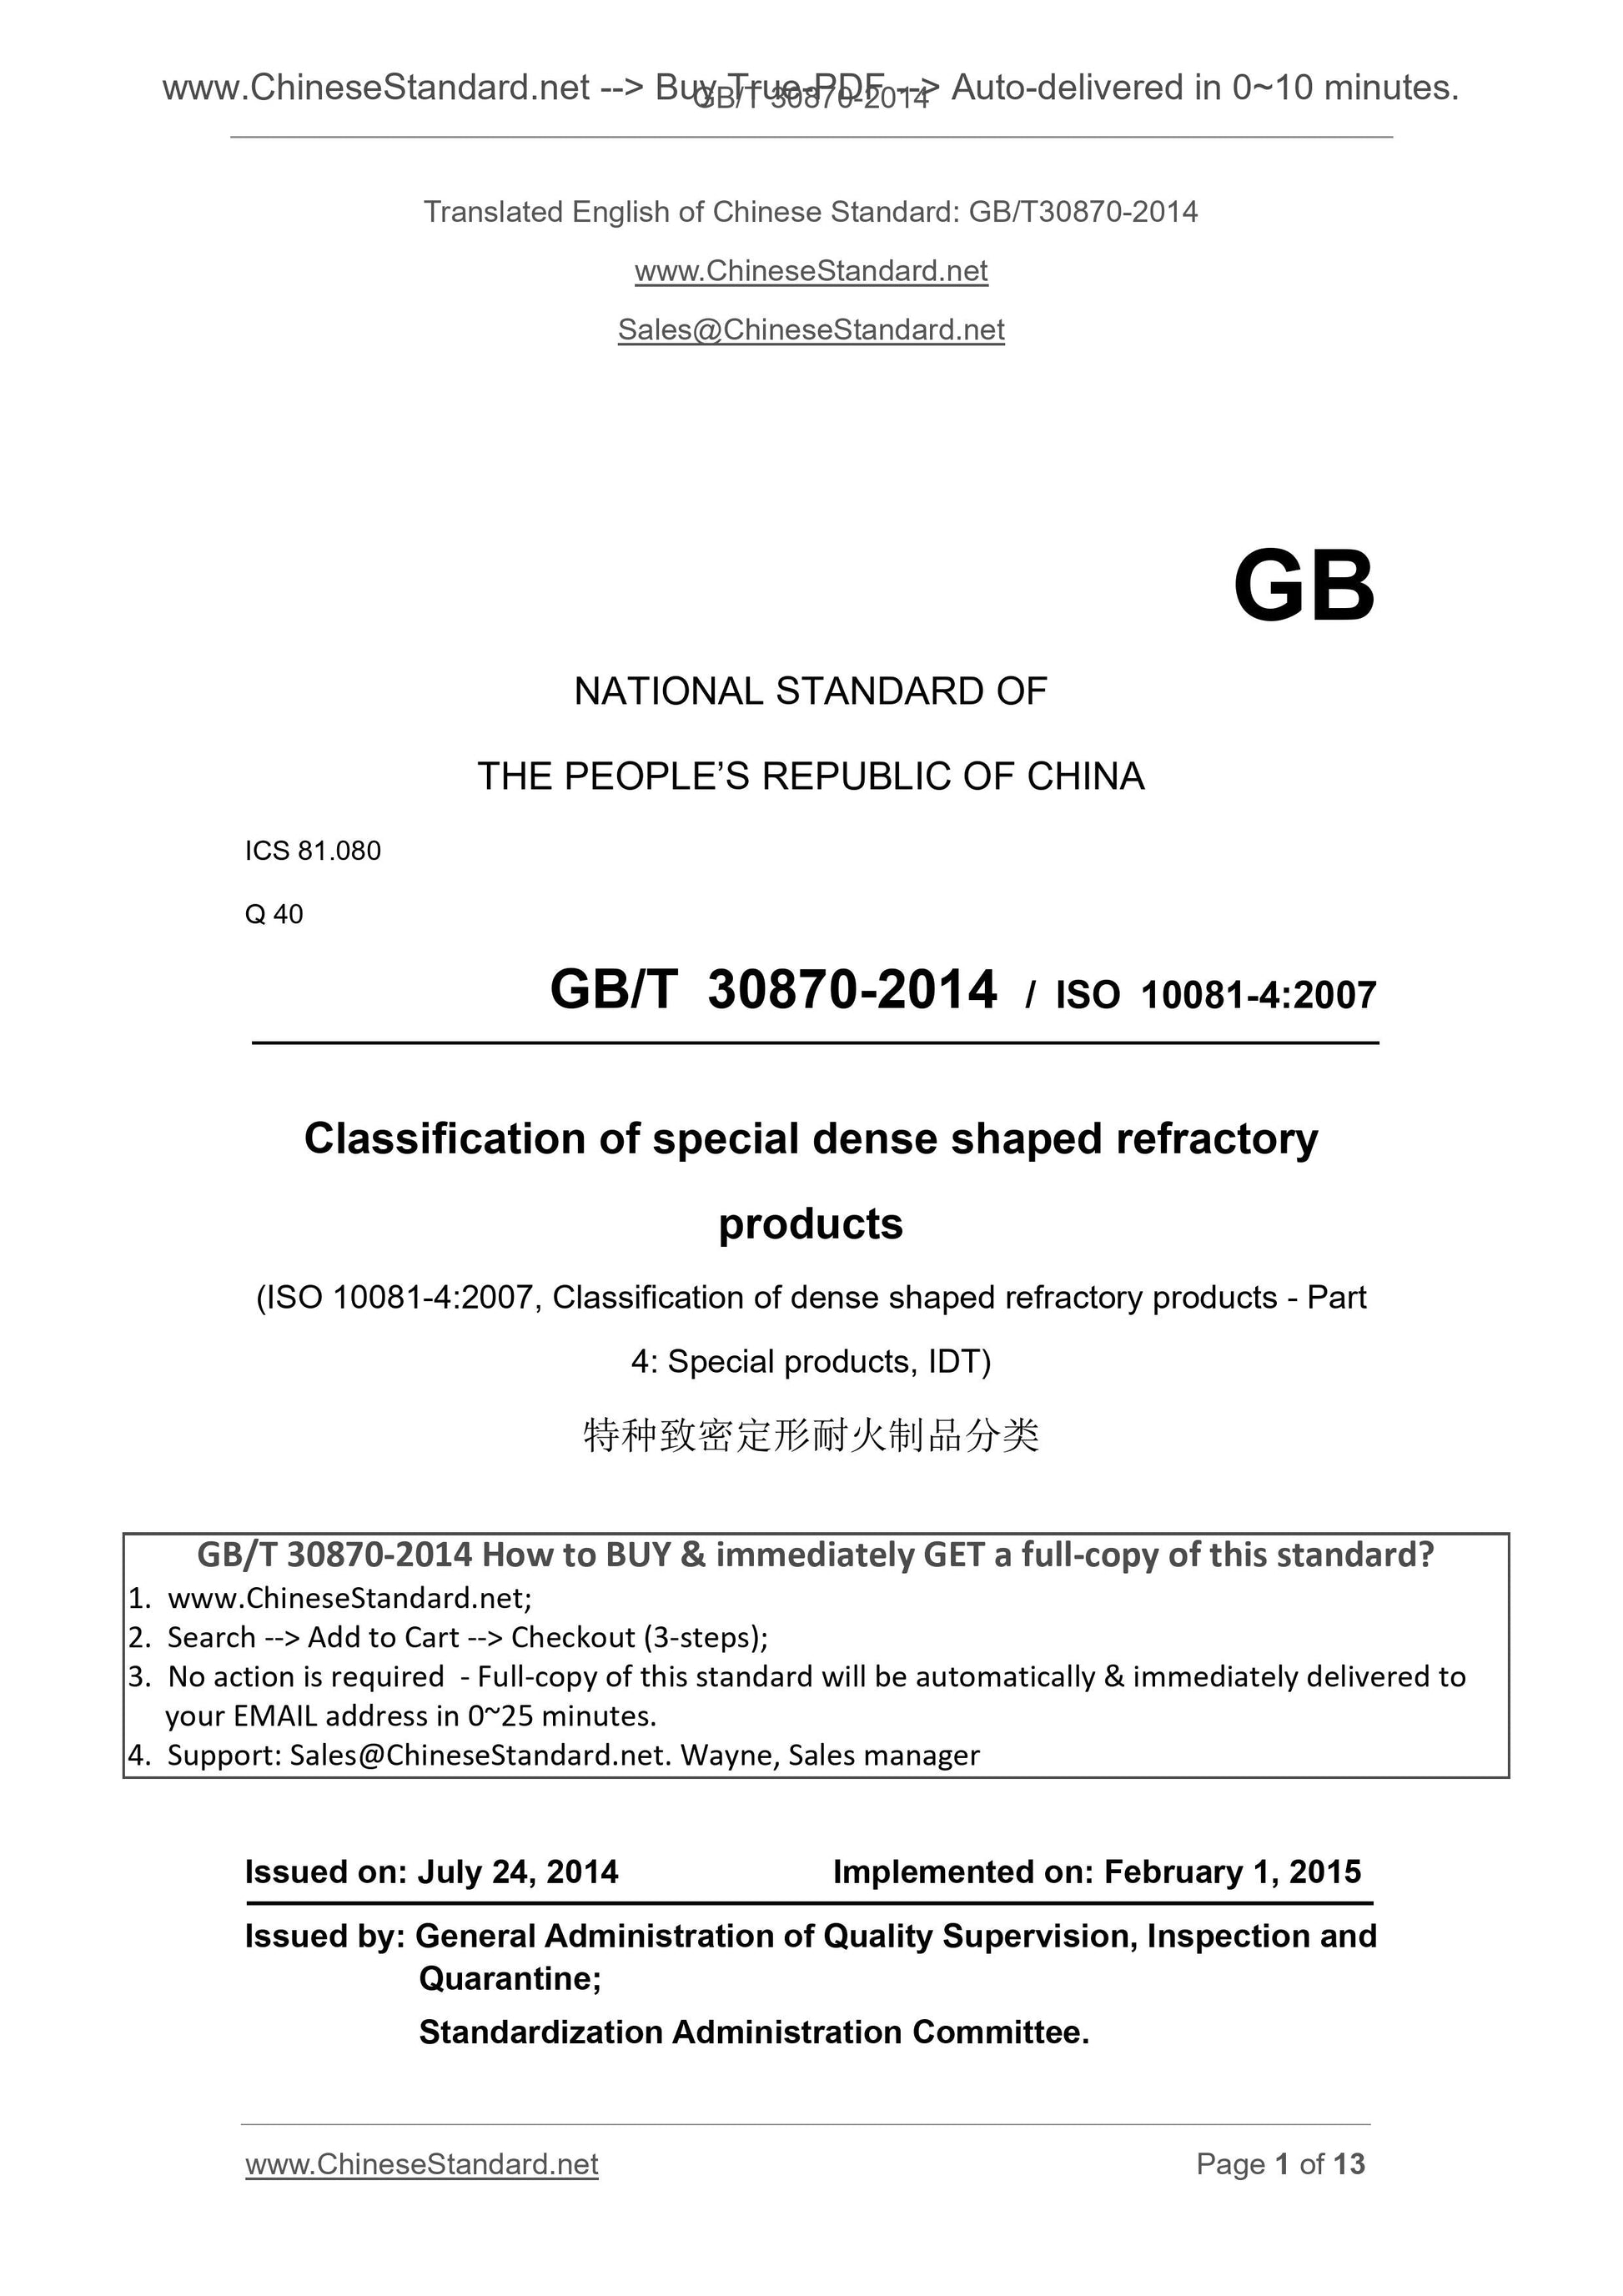 GB/T 30870-2014 Page 1